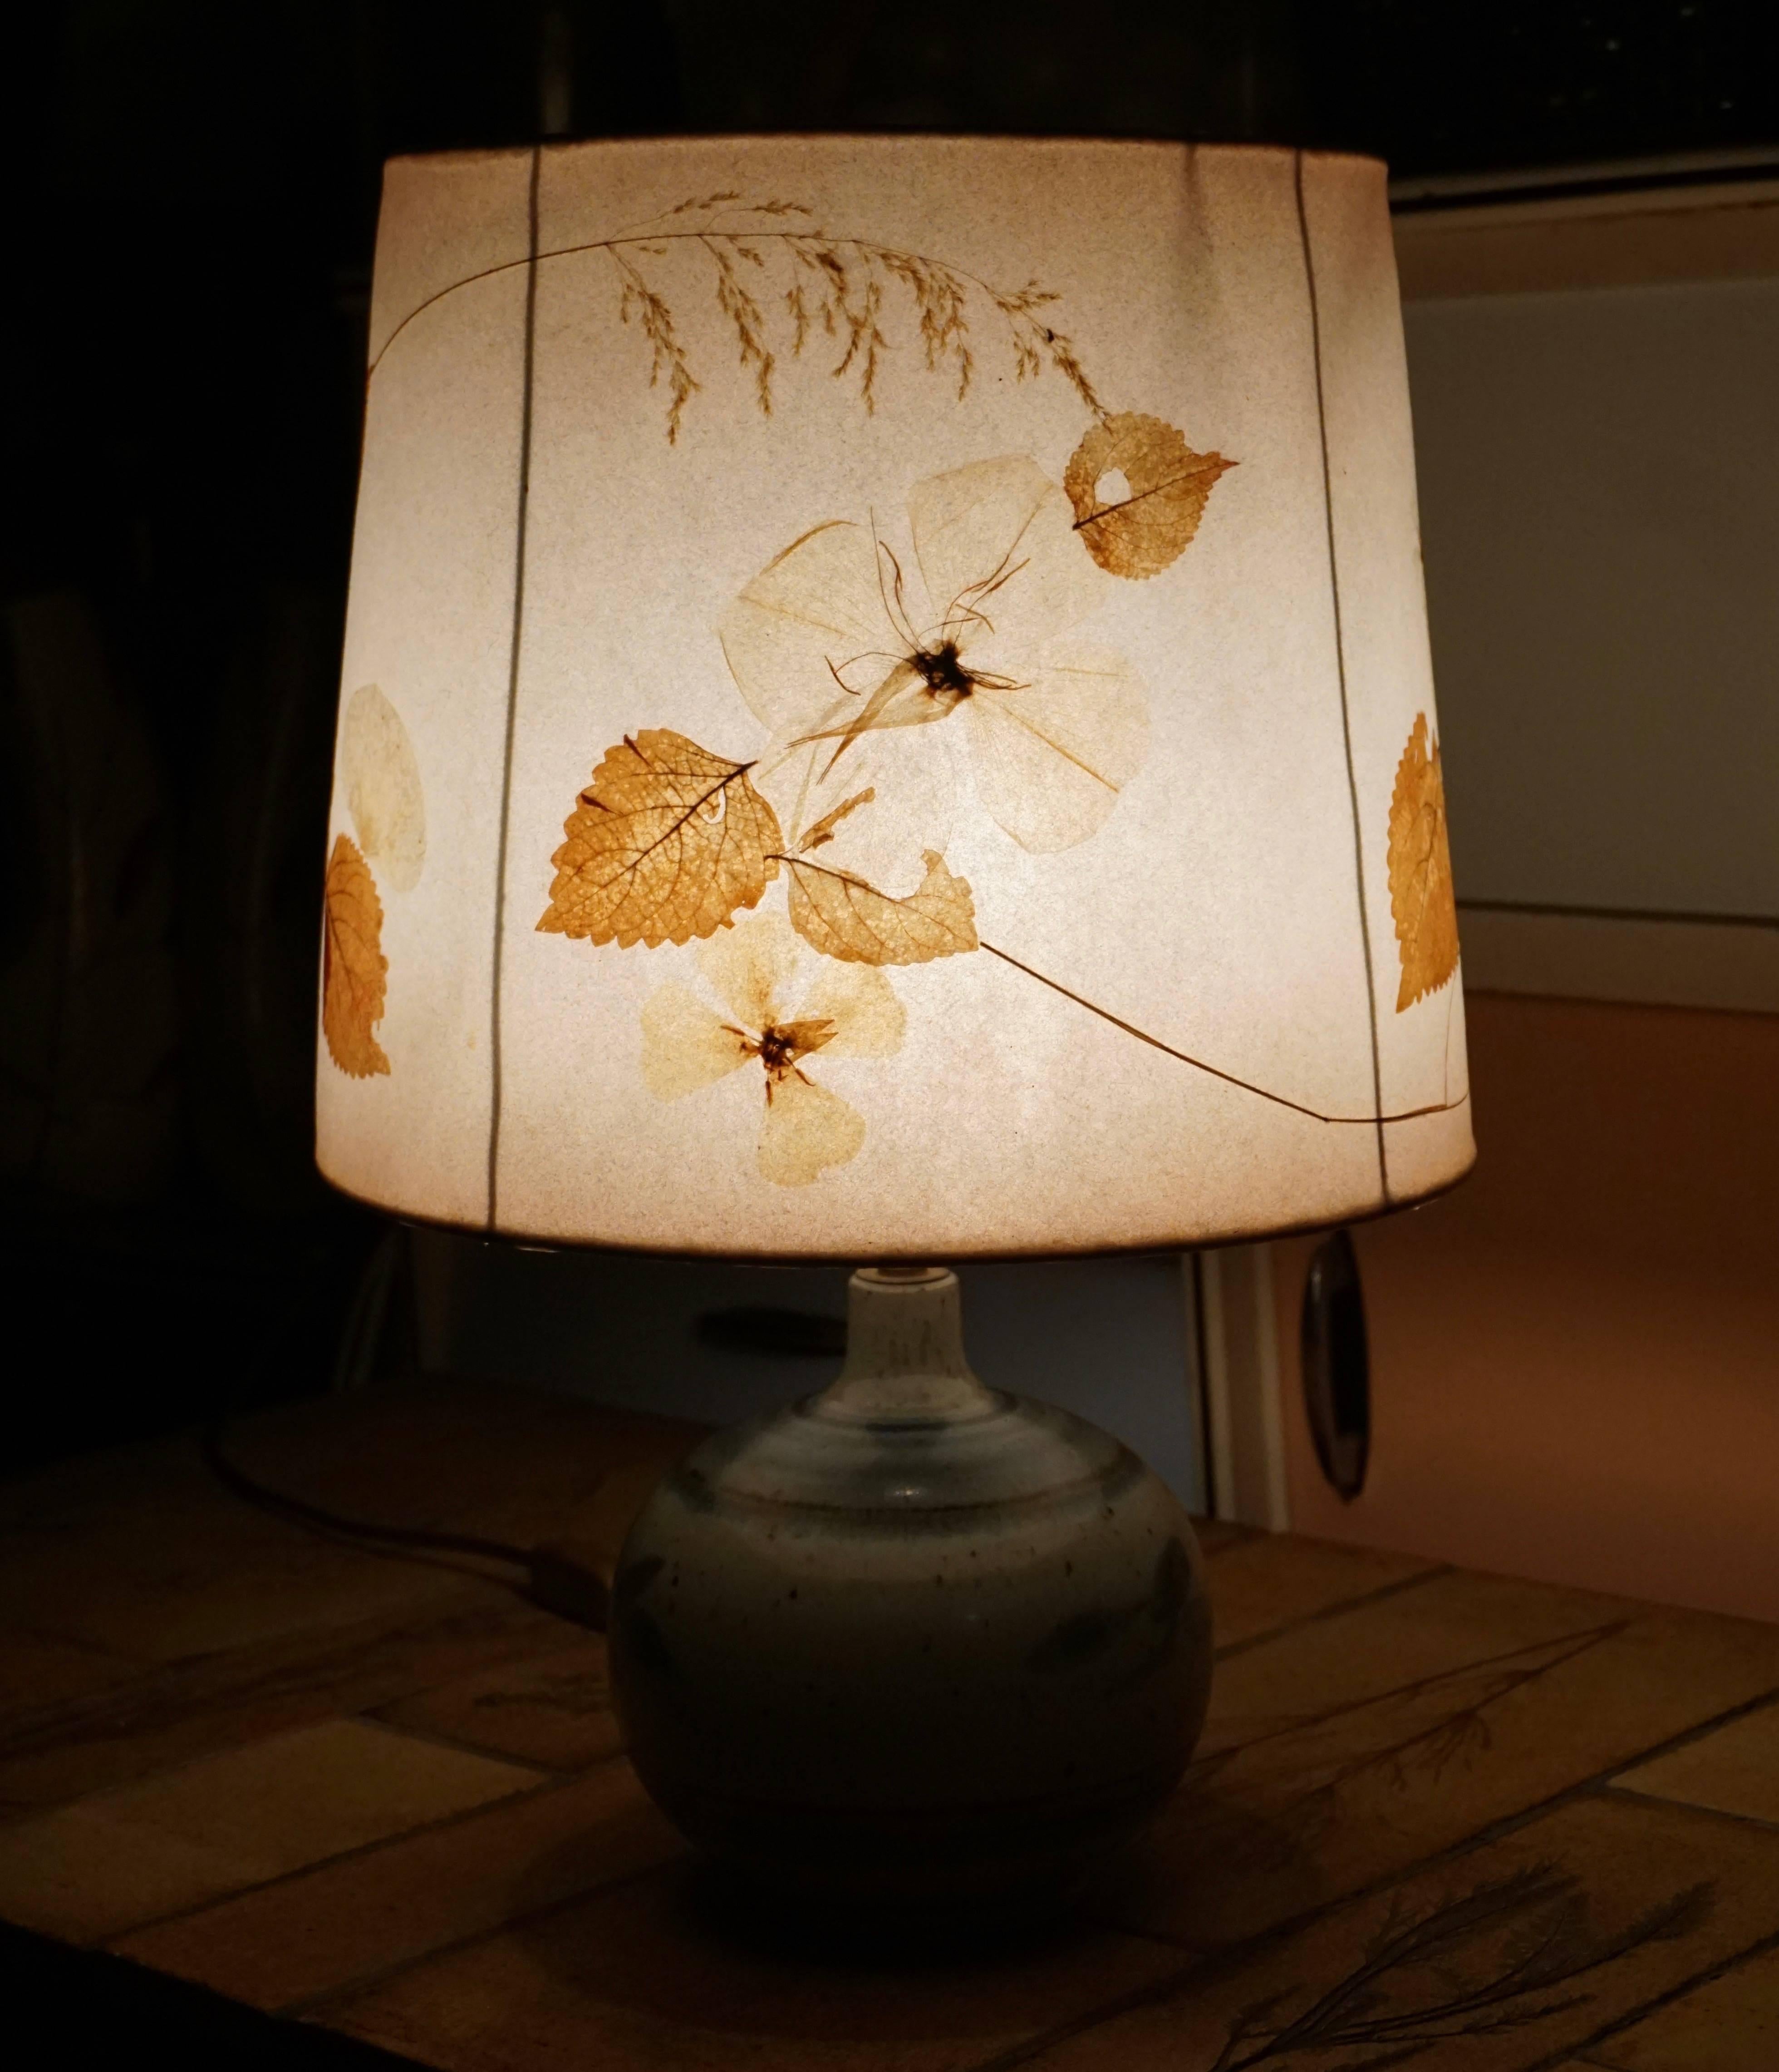 Table lamp with nature leaves lampshade.
Measures: Diameter 32 cm.
Height 49 cm.
One E27 bulb.